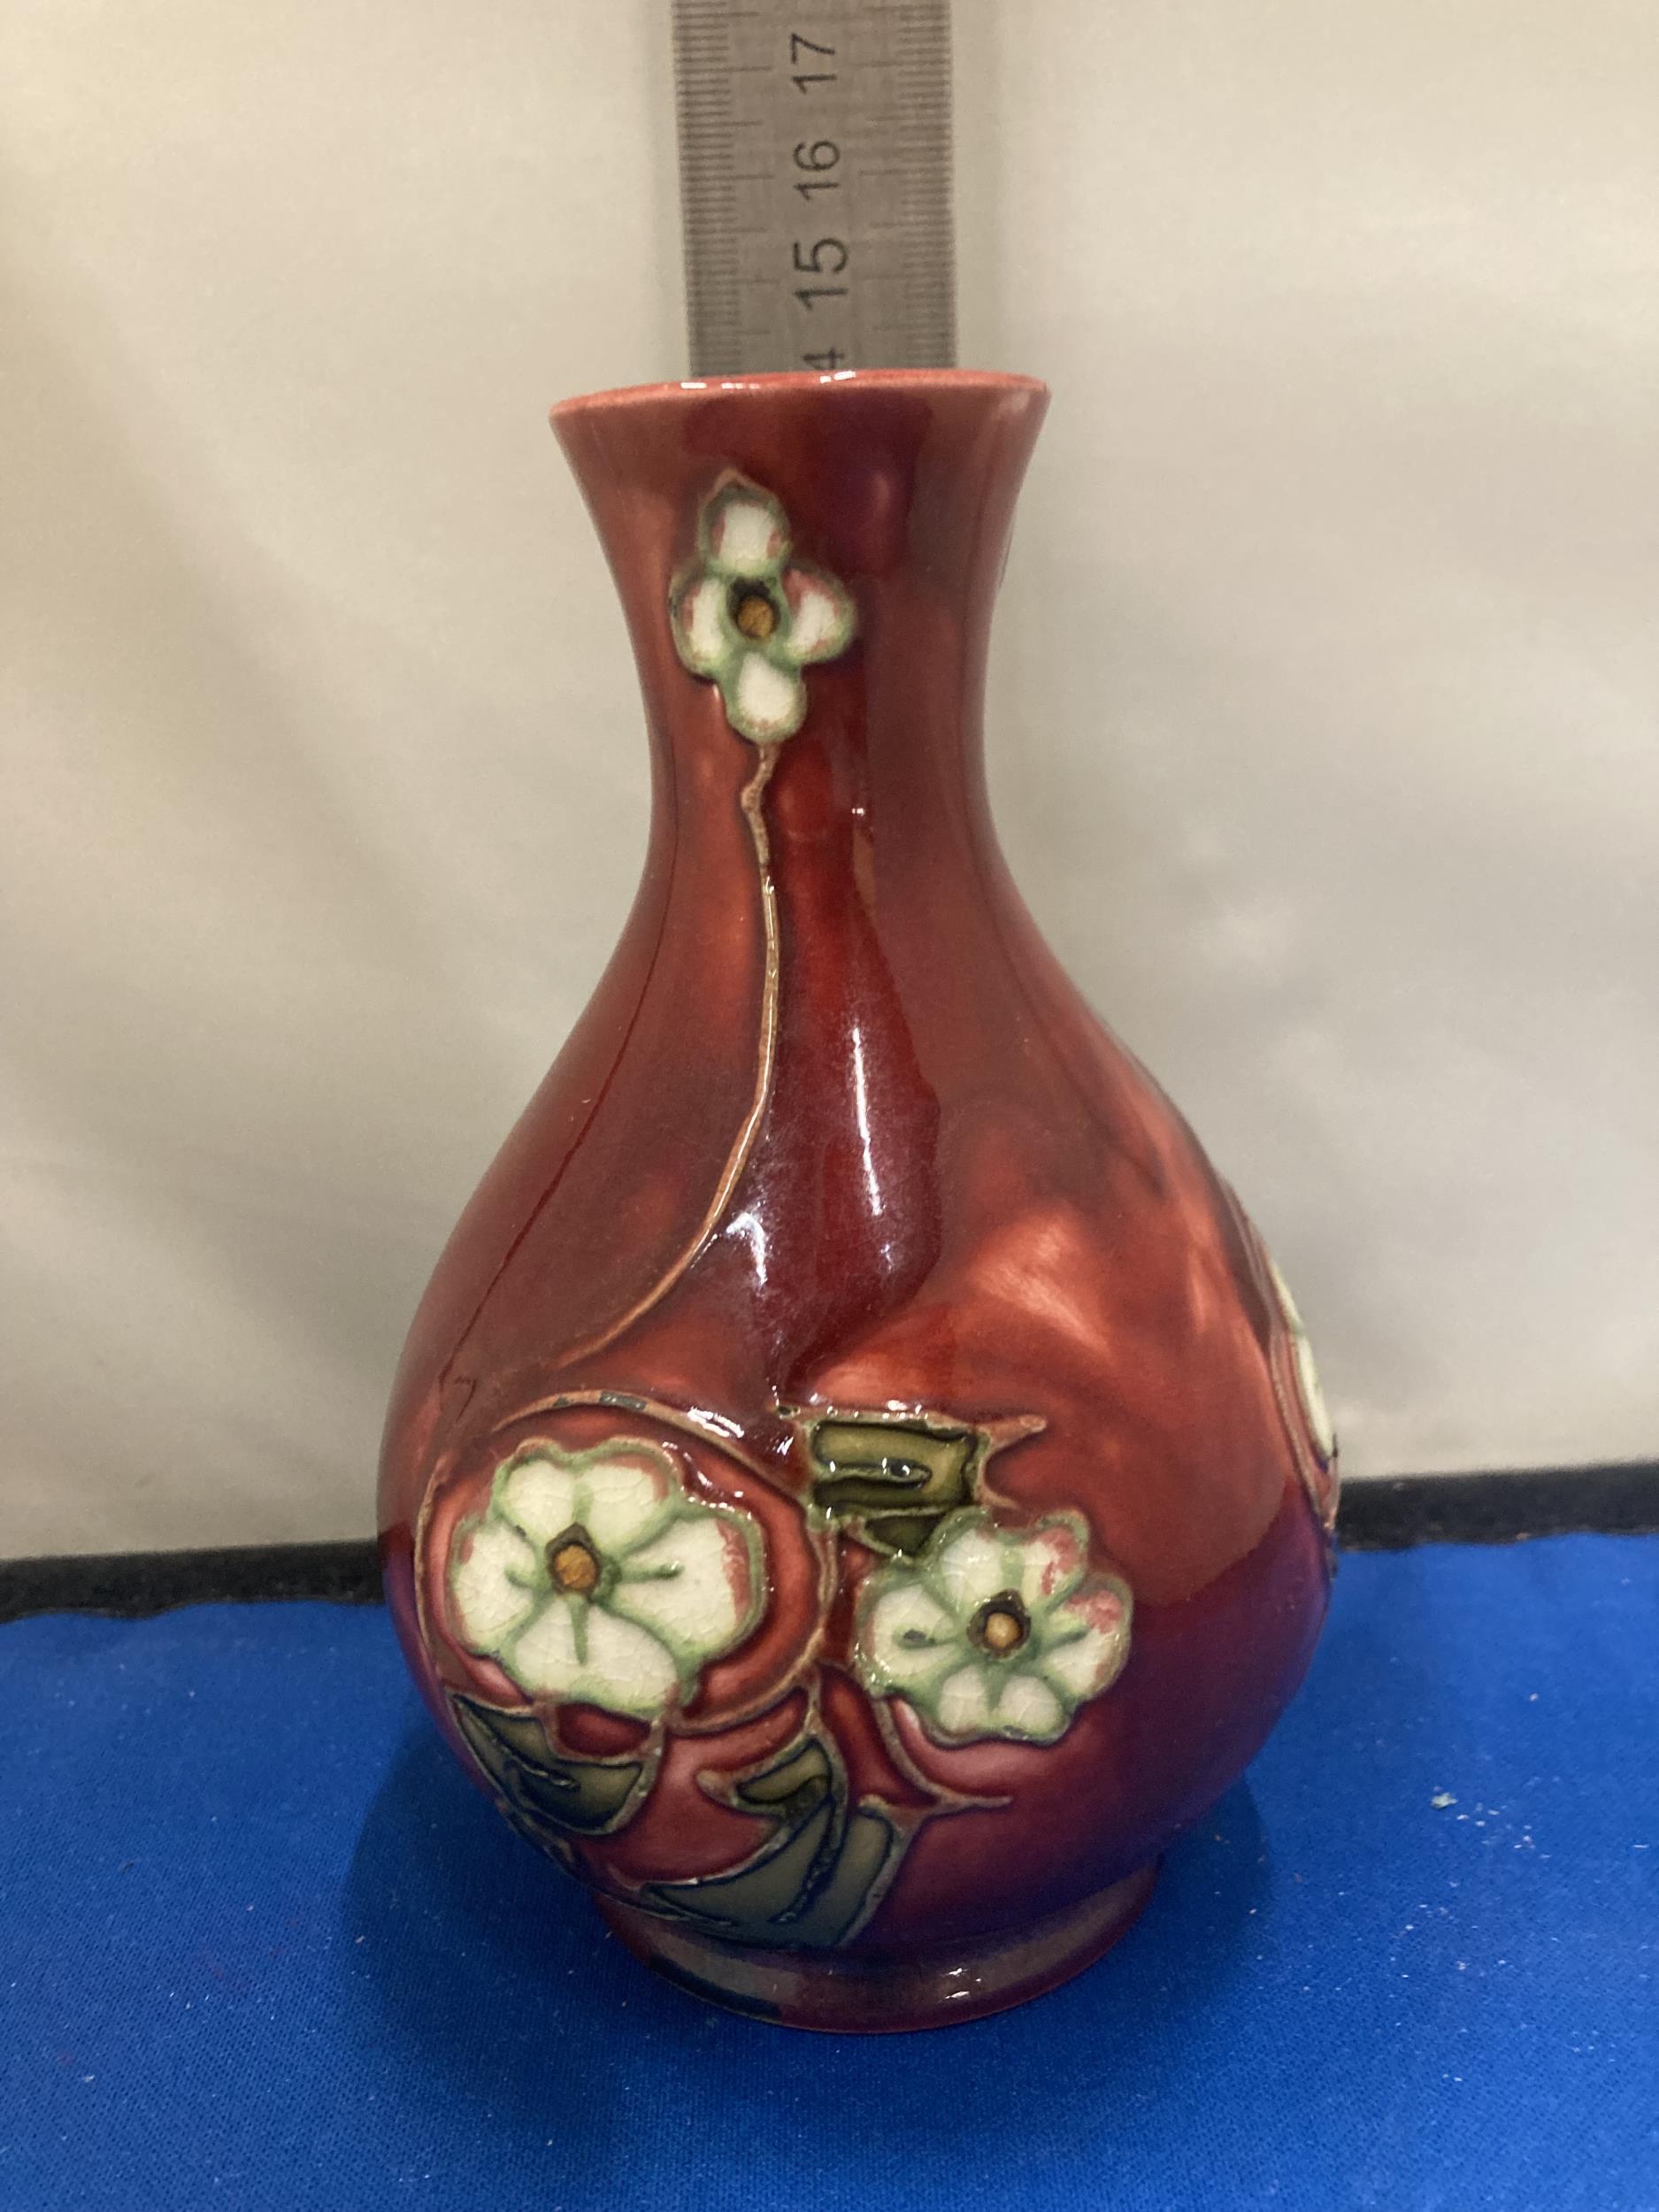 A MINTON SECESSIONIST VASE IN RED WITH CREAM FLOWERS CIRCA 1910 MARKED TO THE BASE MINTONS LTD No 33 - Image 4 of 4